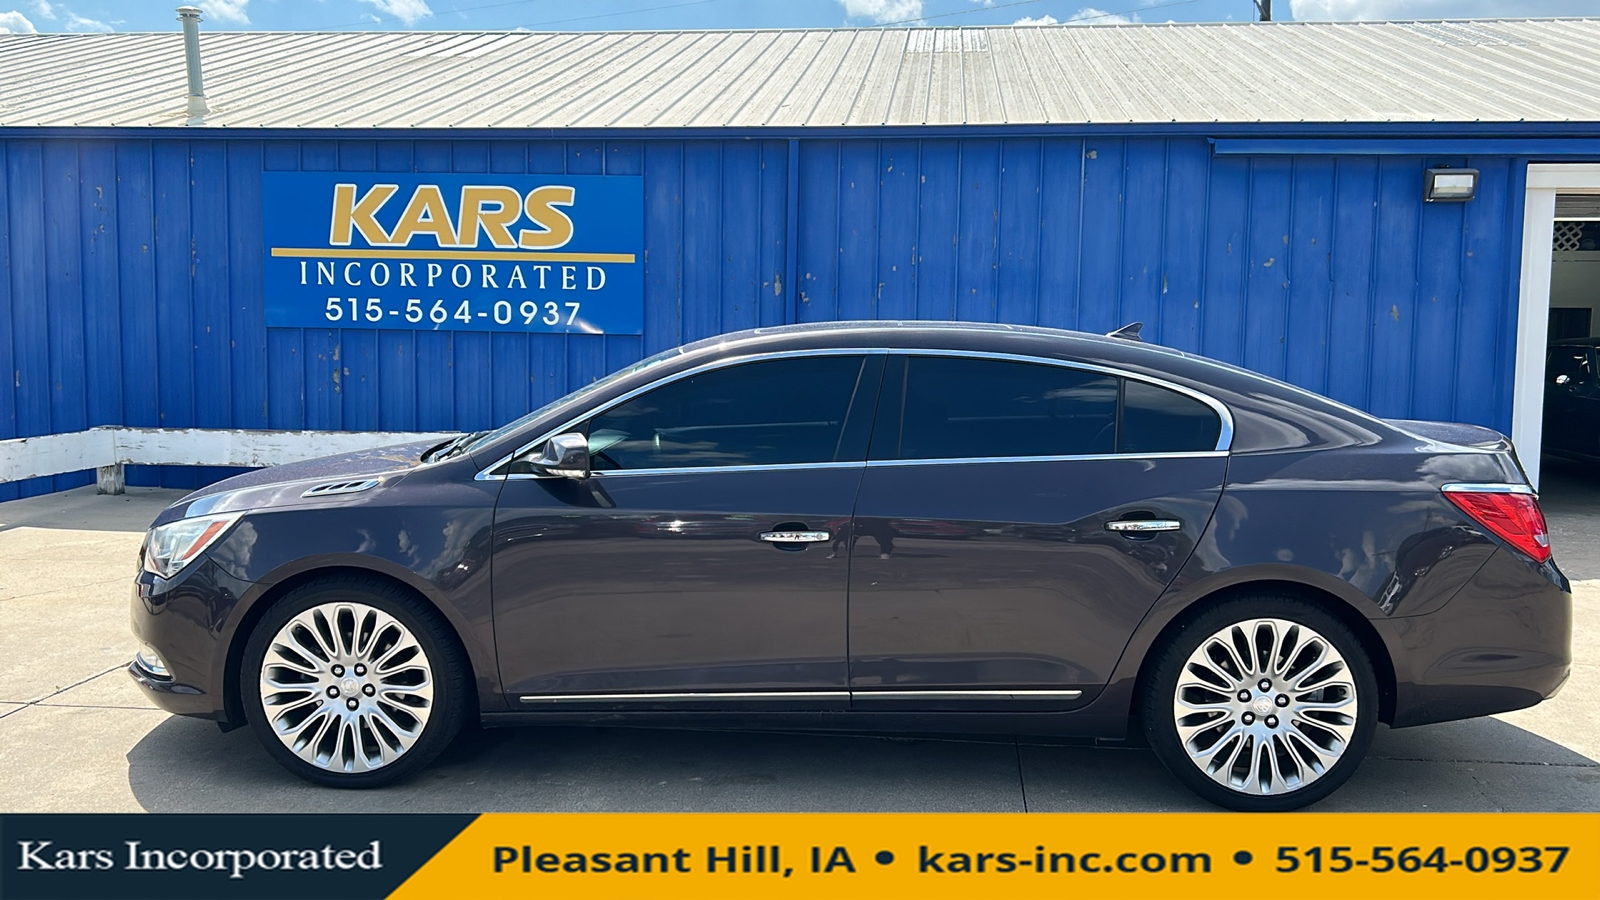 2014 Buick LaCrosse TOURING  - E74190P  - Kars Incorporated